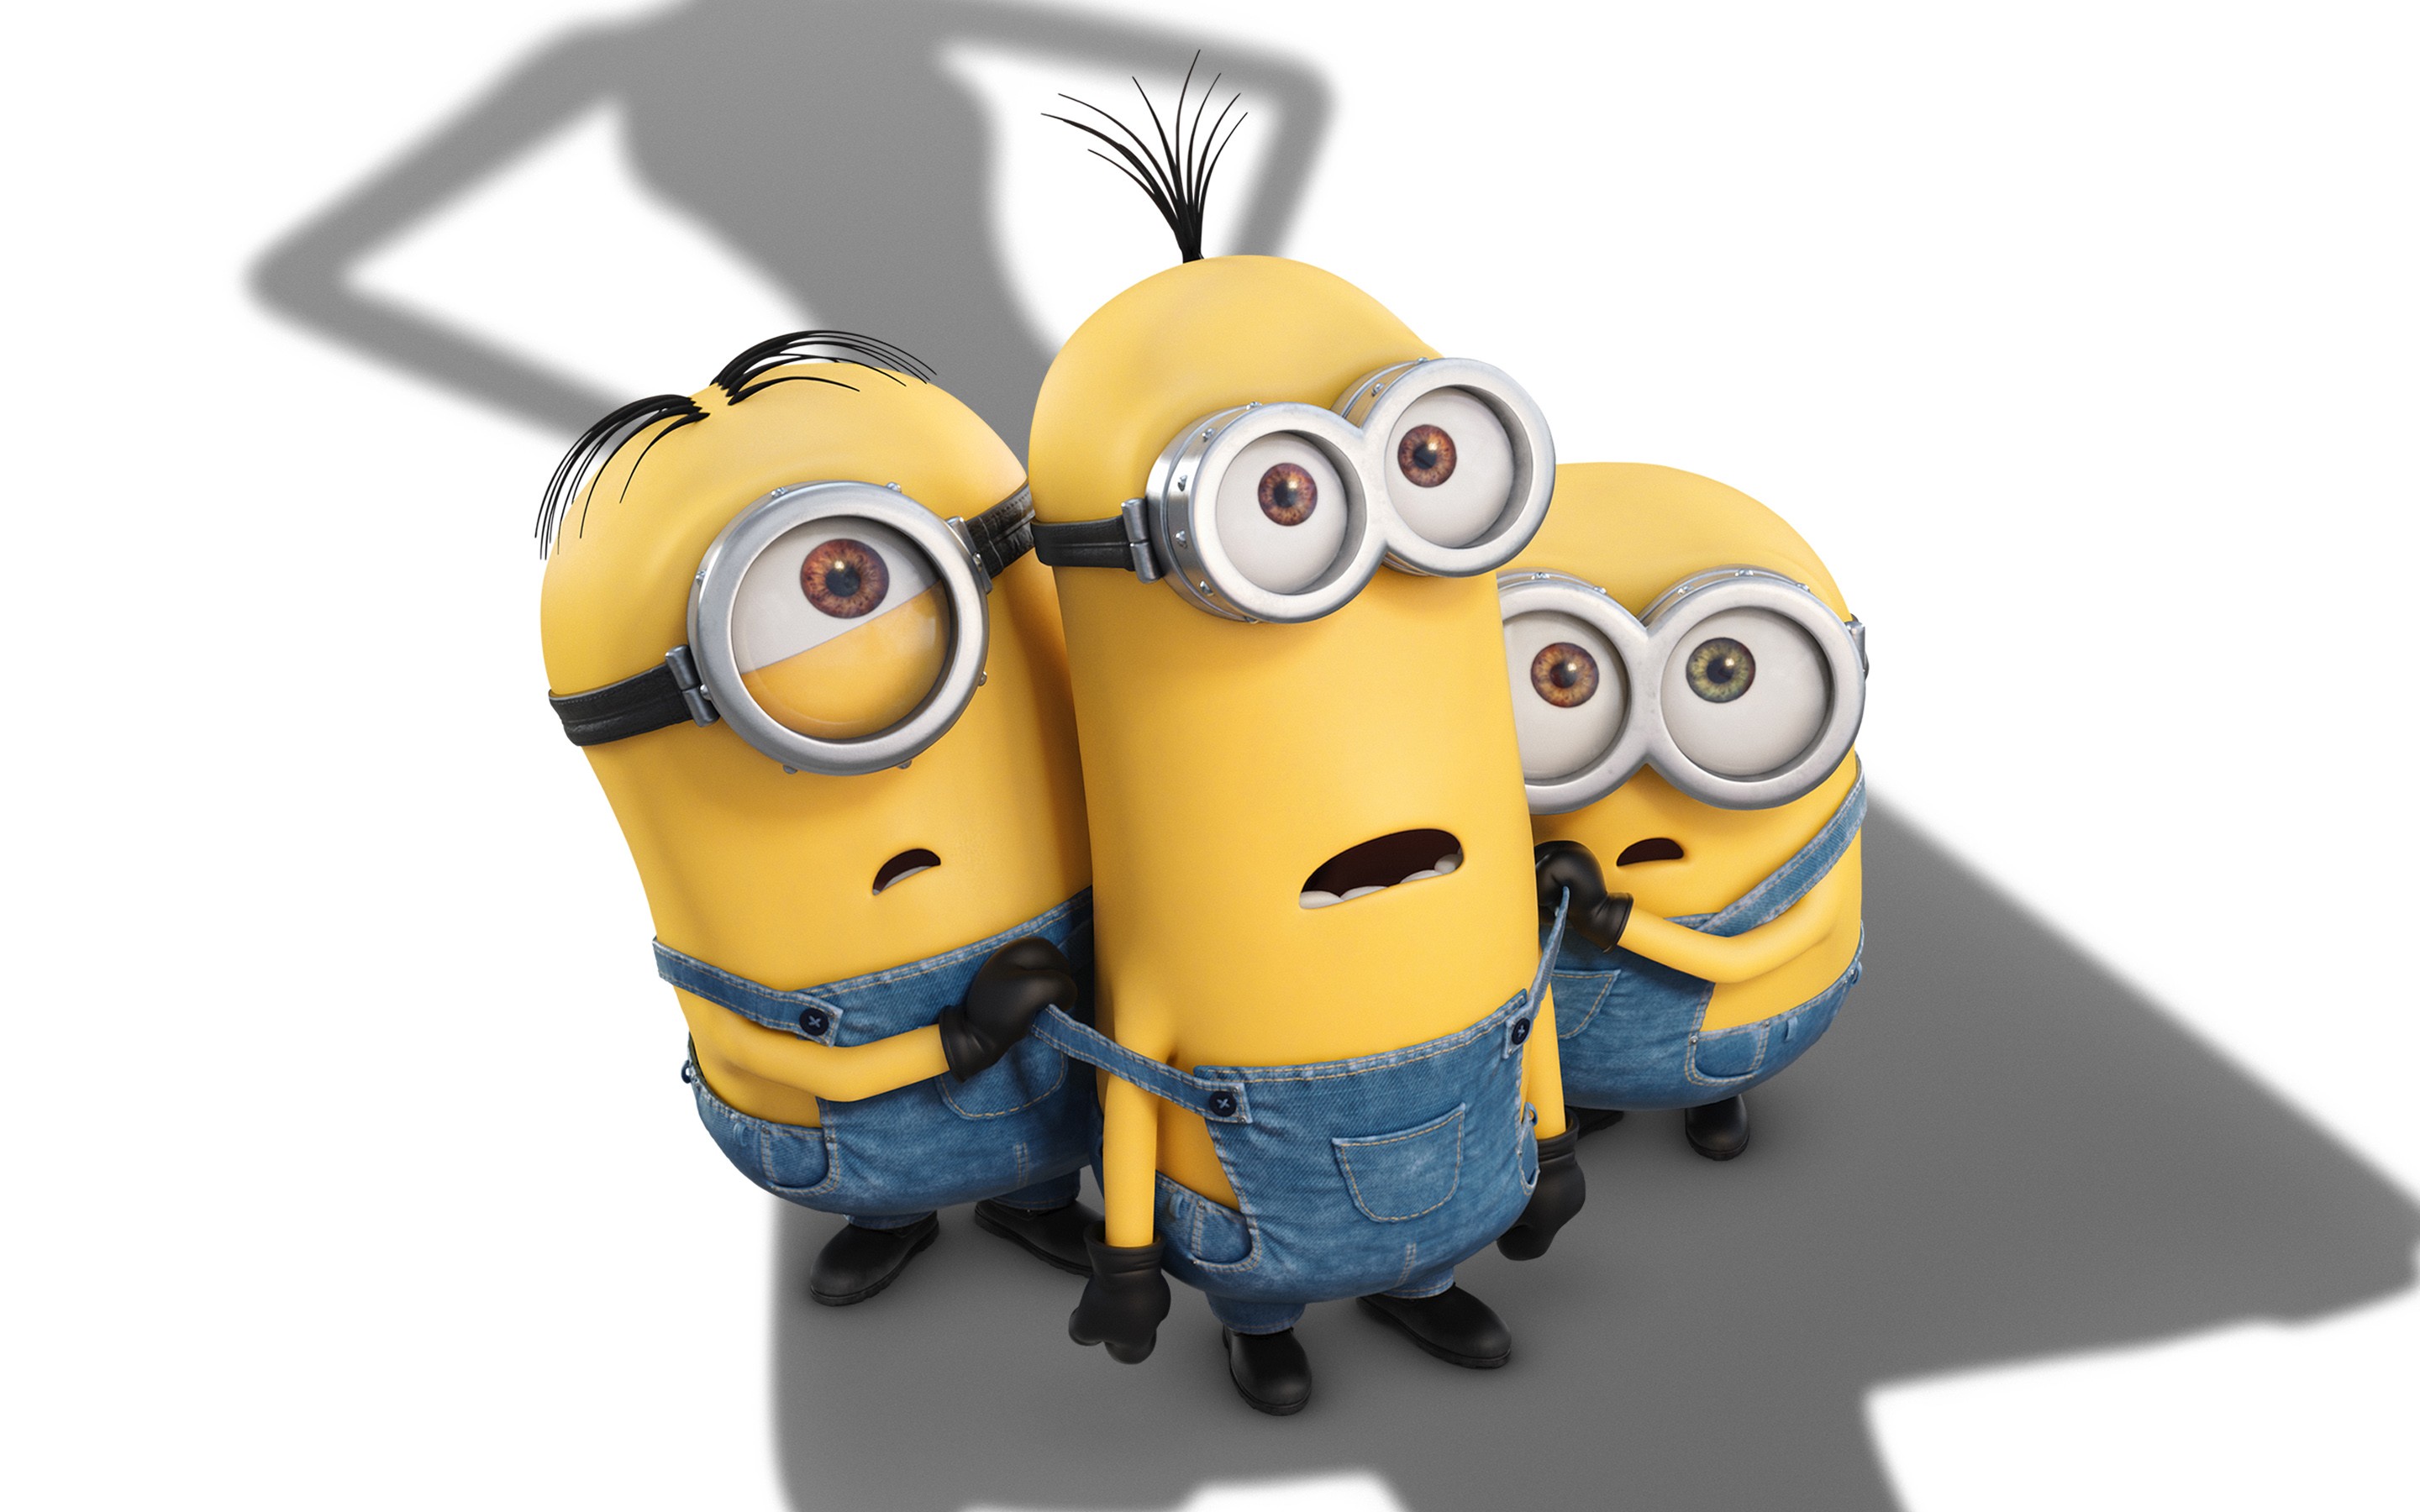 the minions full movie download